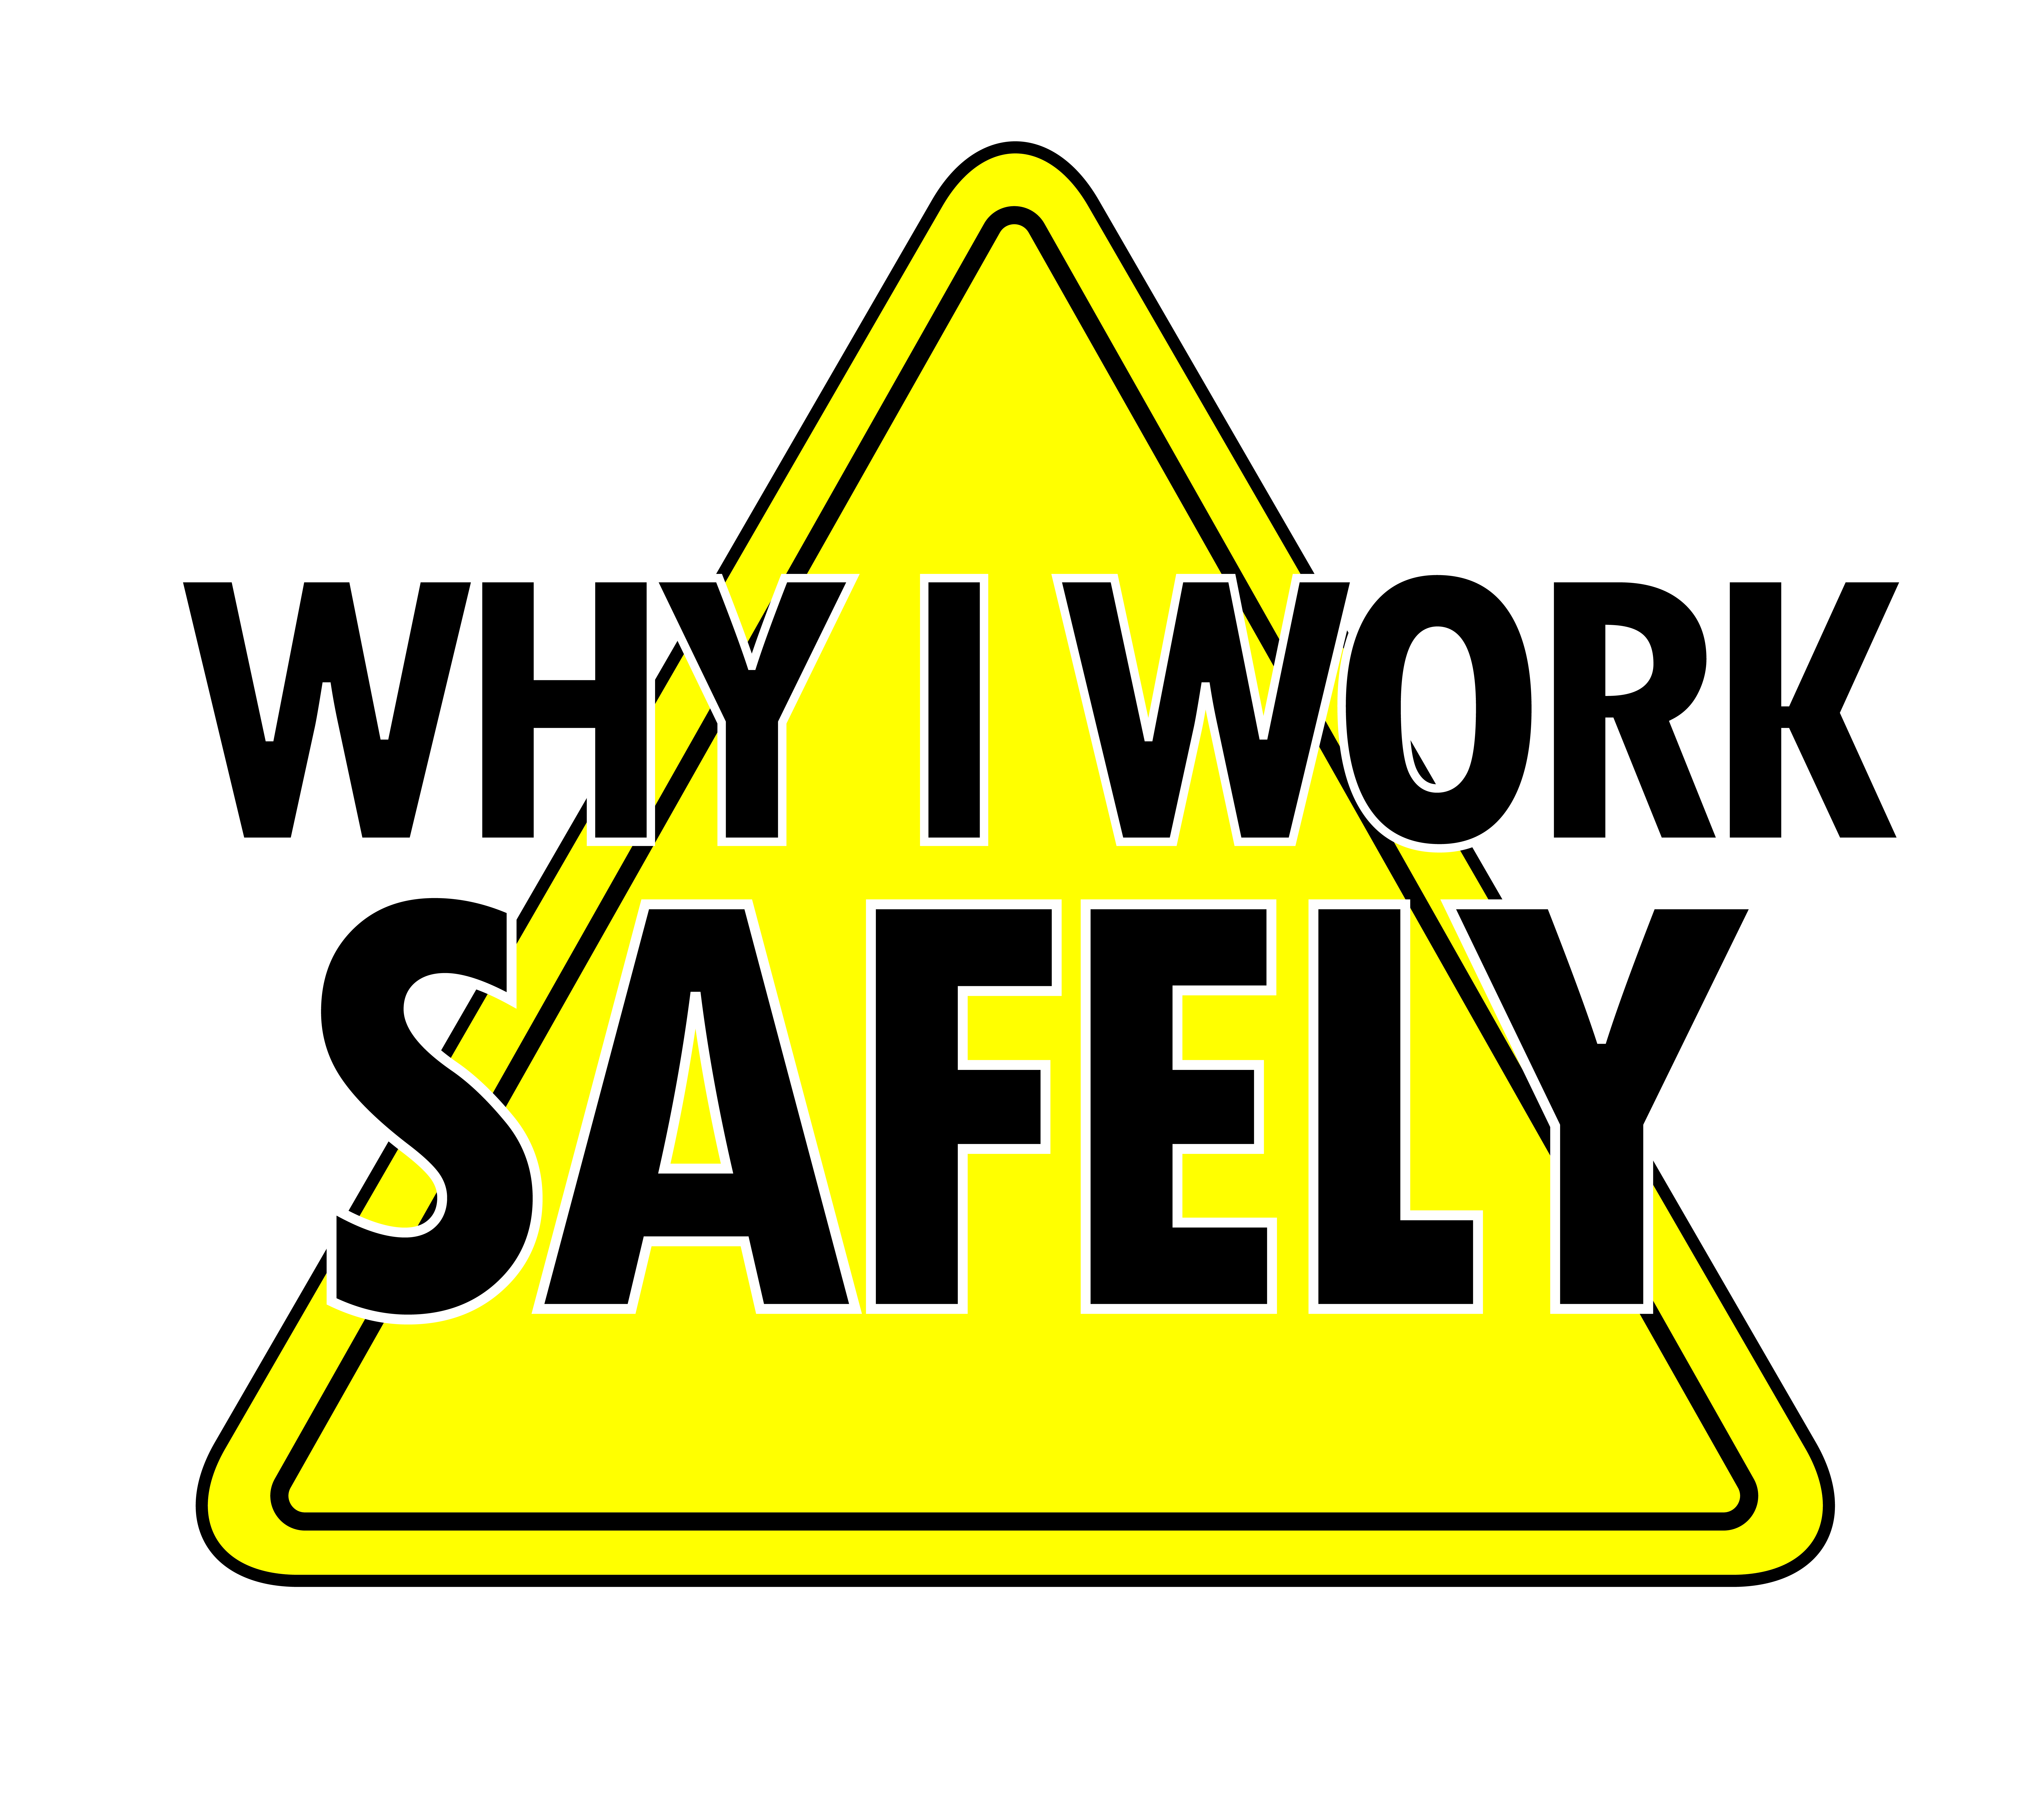 Why I work safely